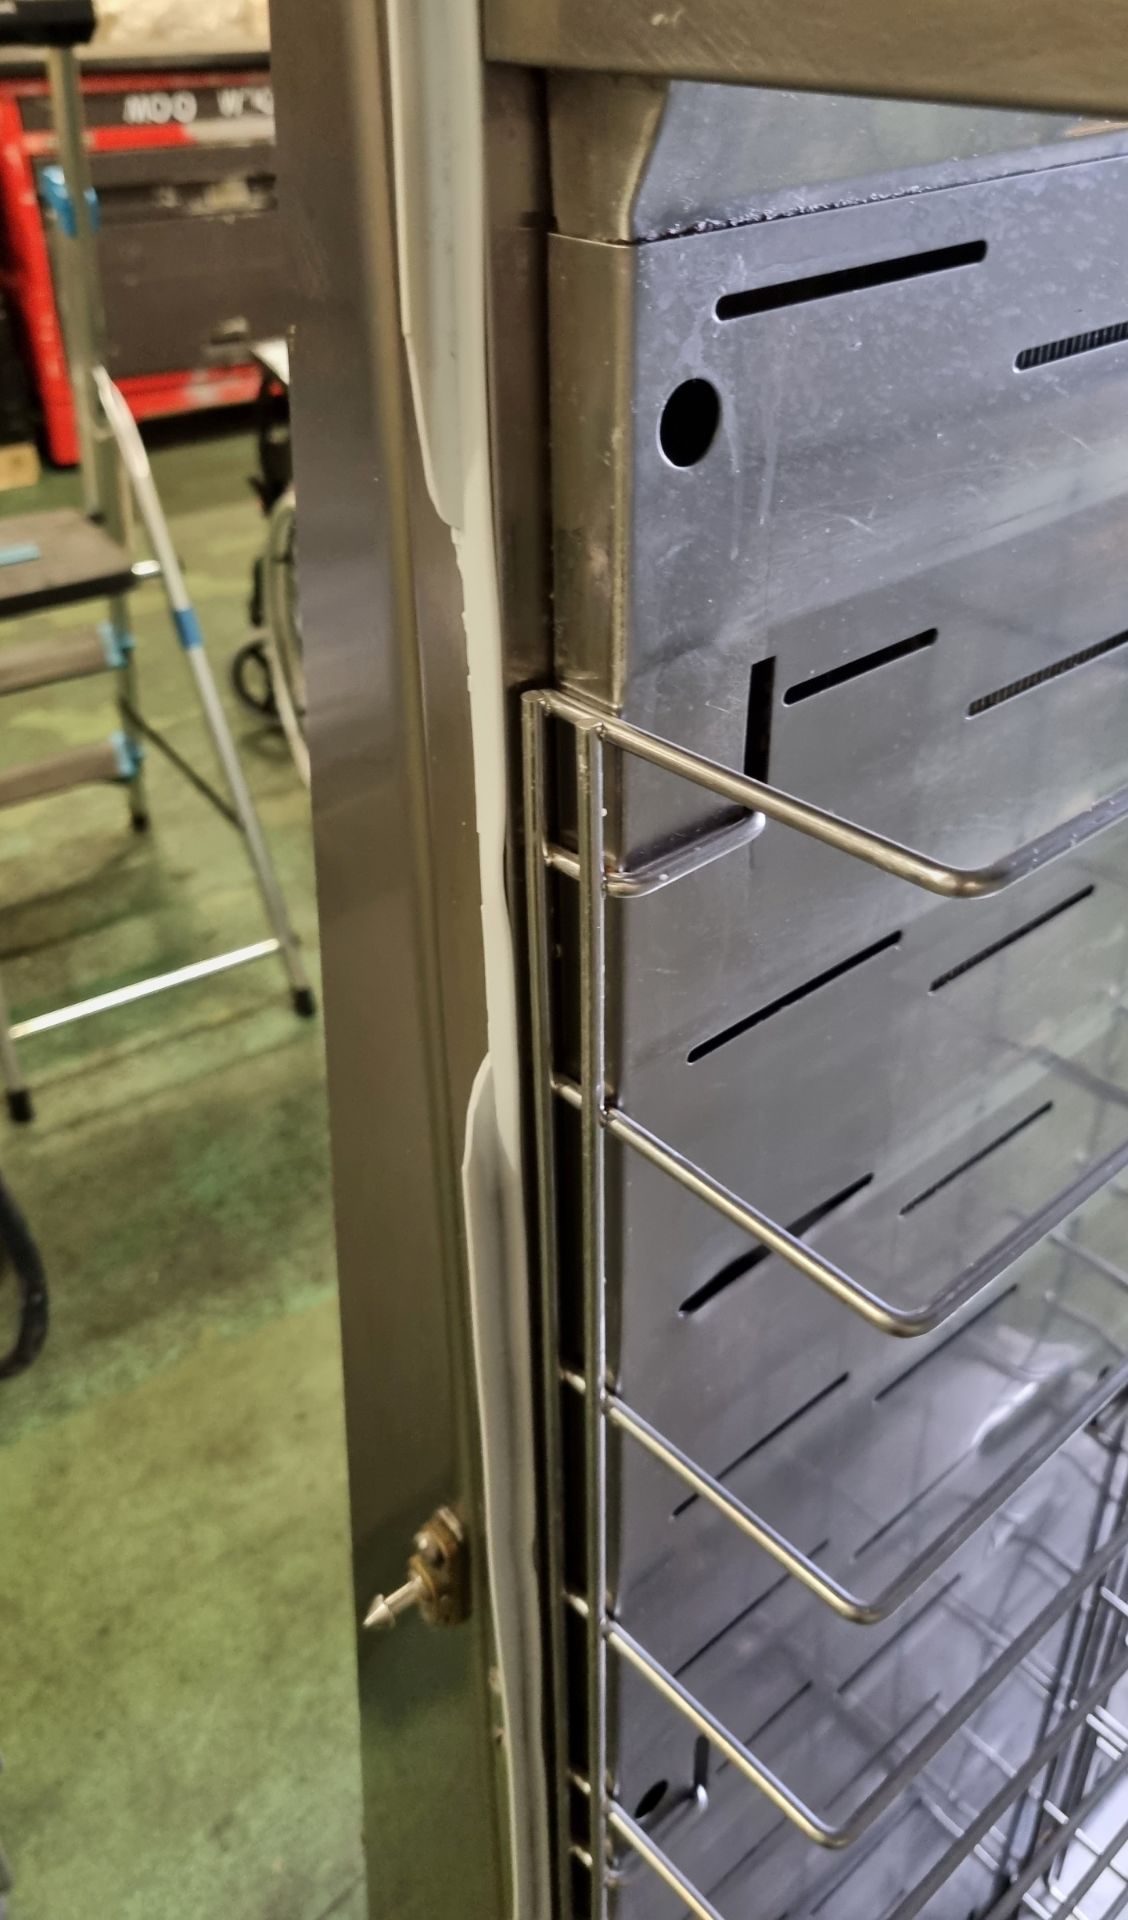 Burlodge RTS hot and cold tray delivery trolley - opens boths sides - W 800 x D 1100 x H 1500mm - Image 3 of 6